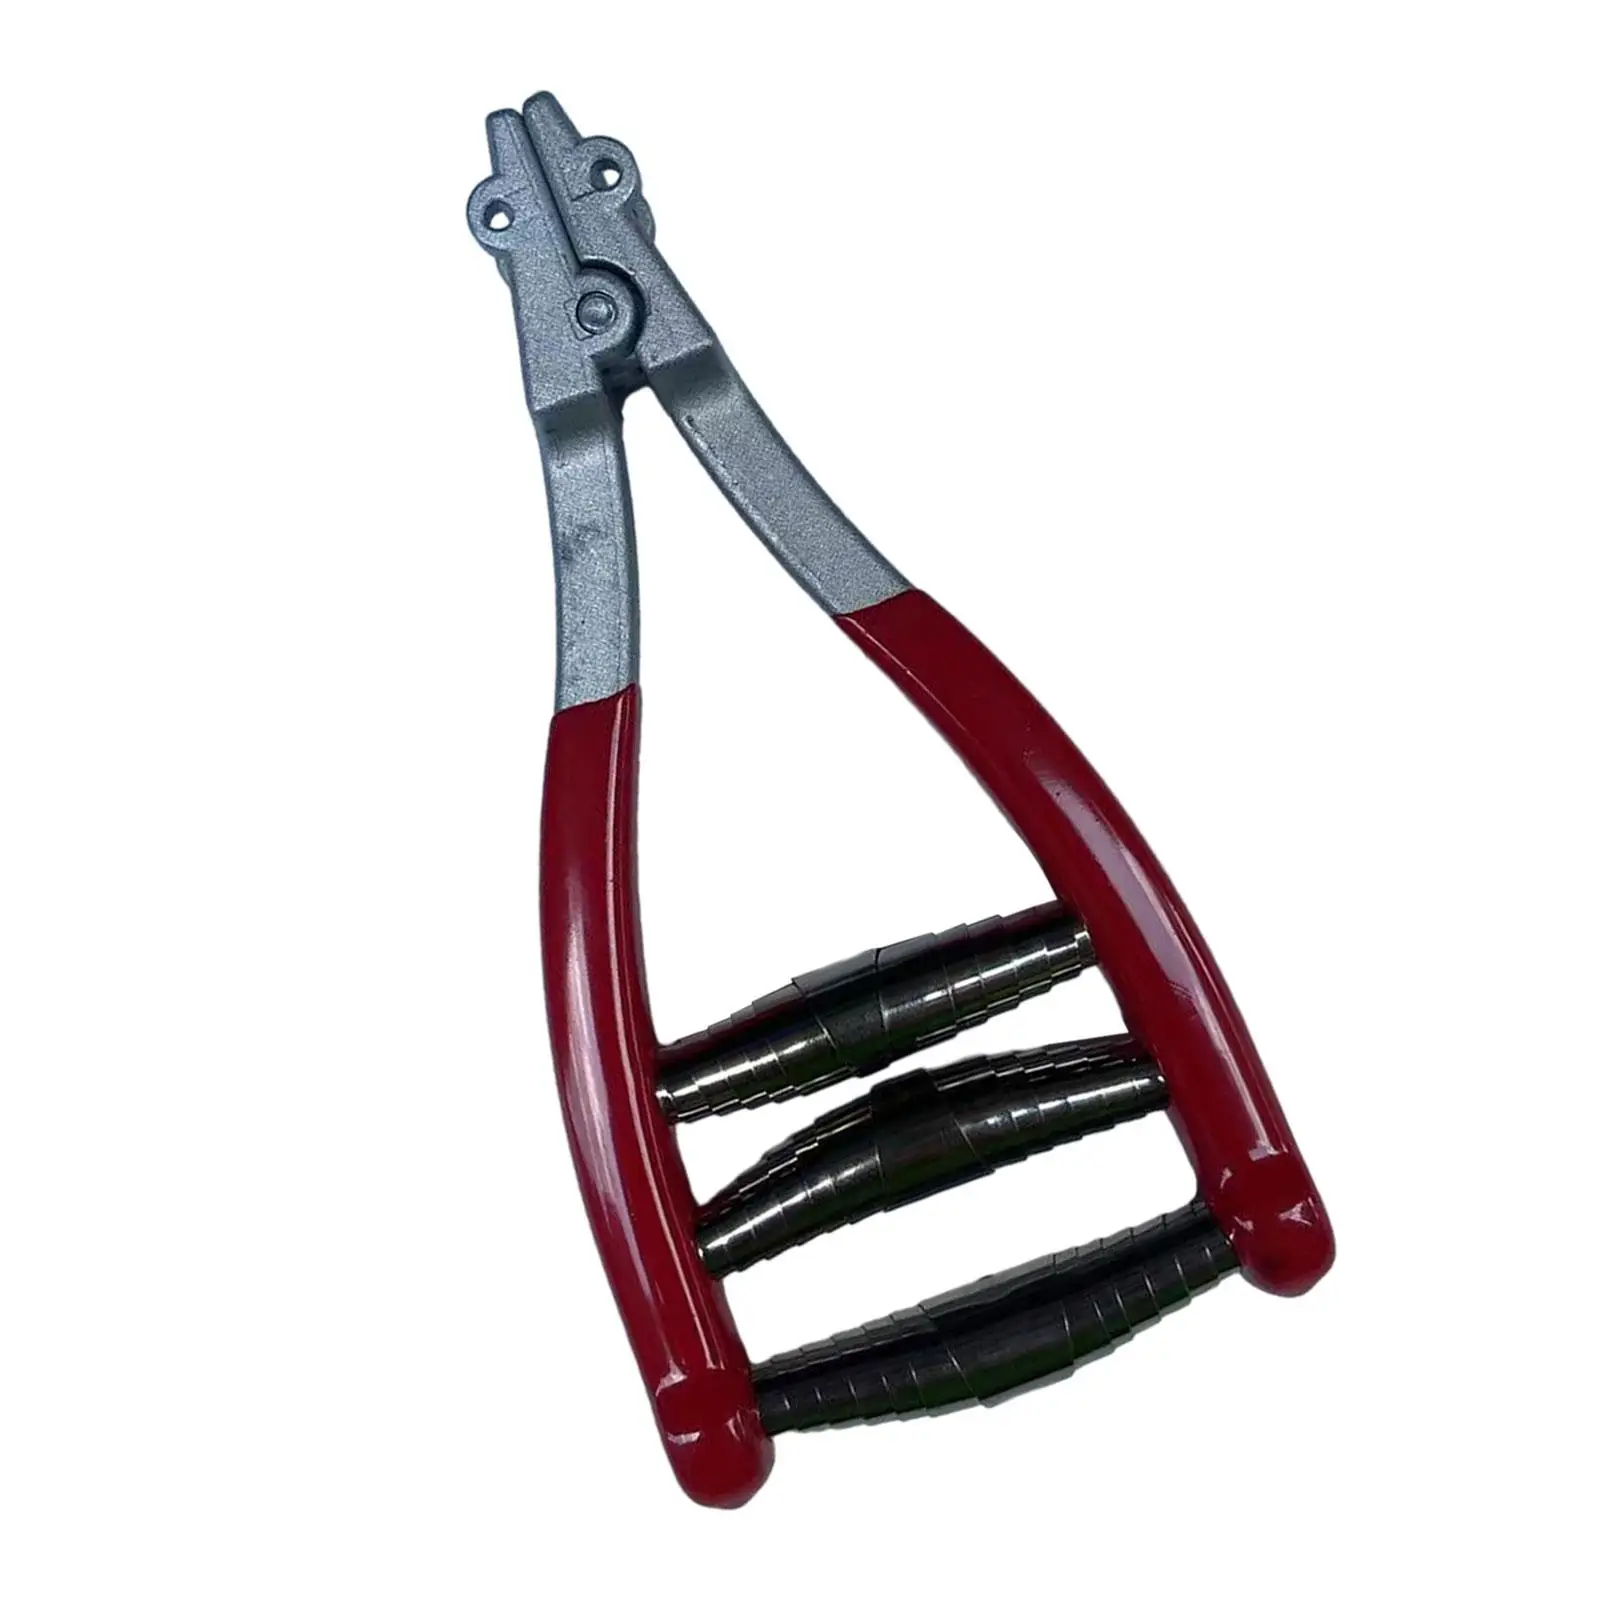 Starting Clamp Stringing Clamp Portable 3 Spring High Quality Stringing Tool for Squash Badminton Racket Tennis Accessories